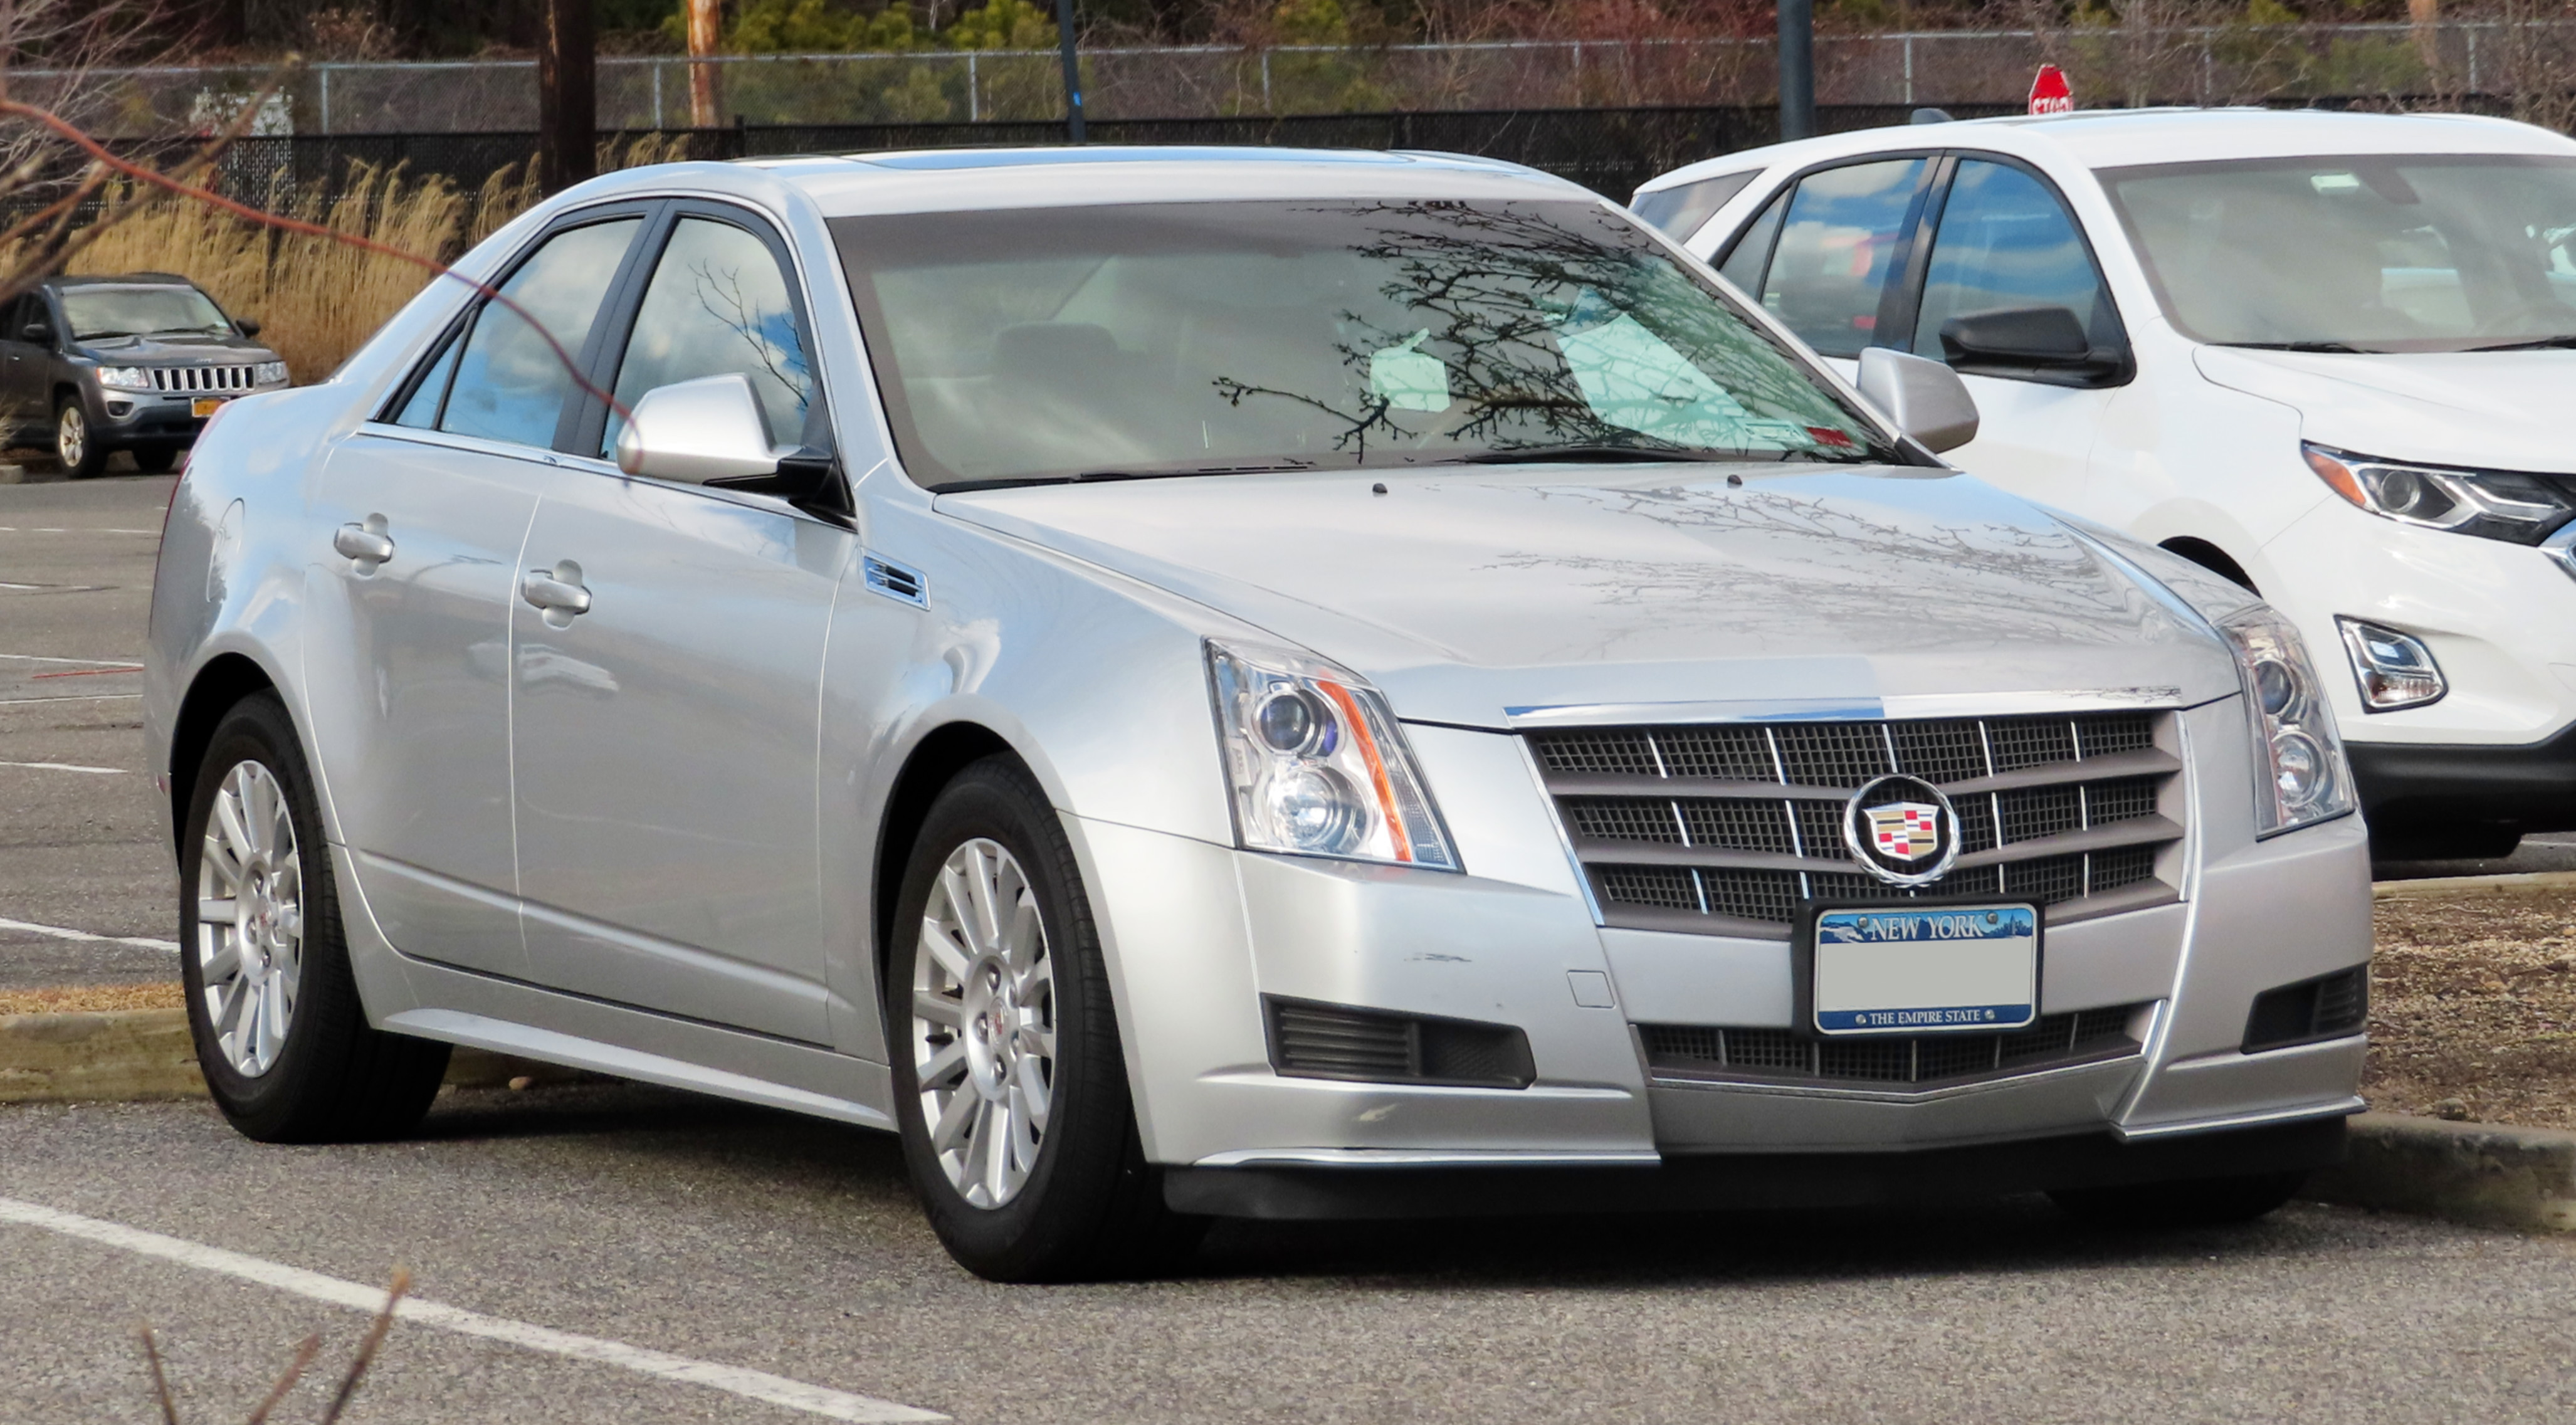 Cadillac 2010. Кадиллак седан 2010. Кадиллак s40. CTS 206-214. Cadillac CTS ДТП.